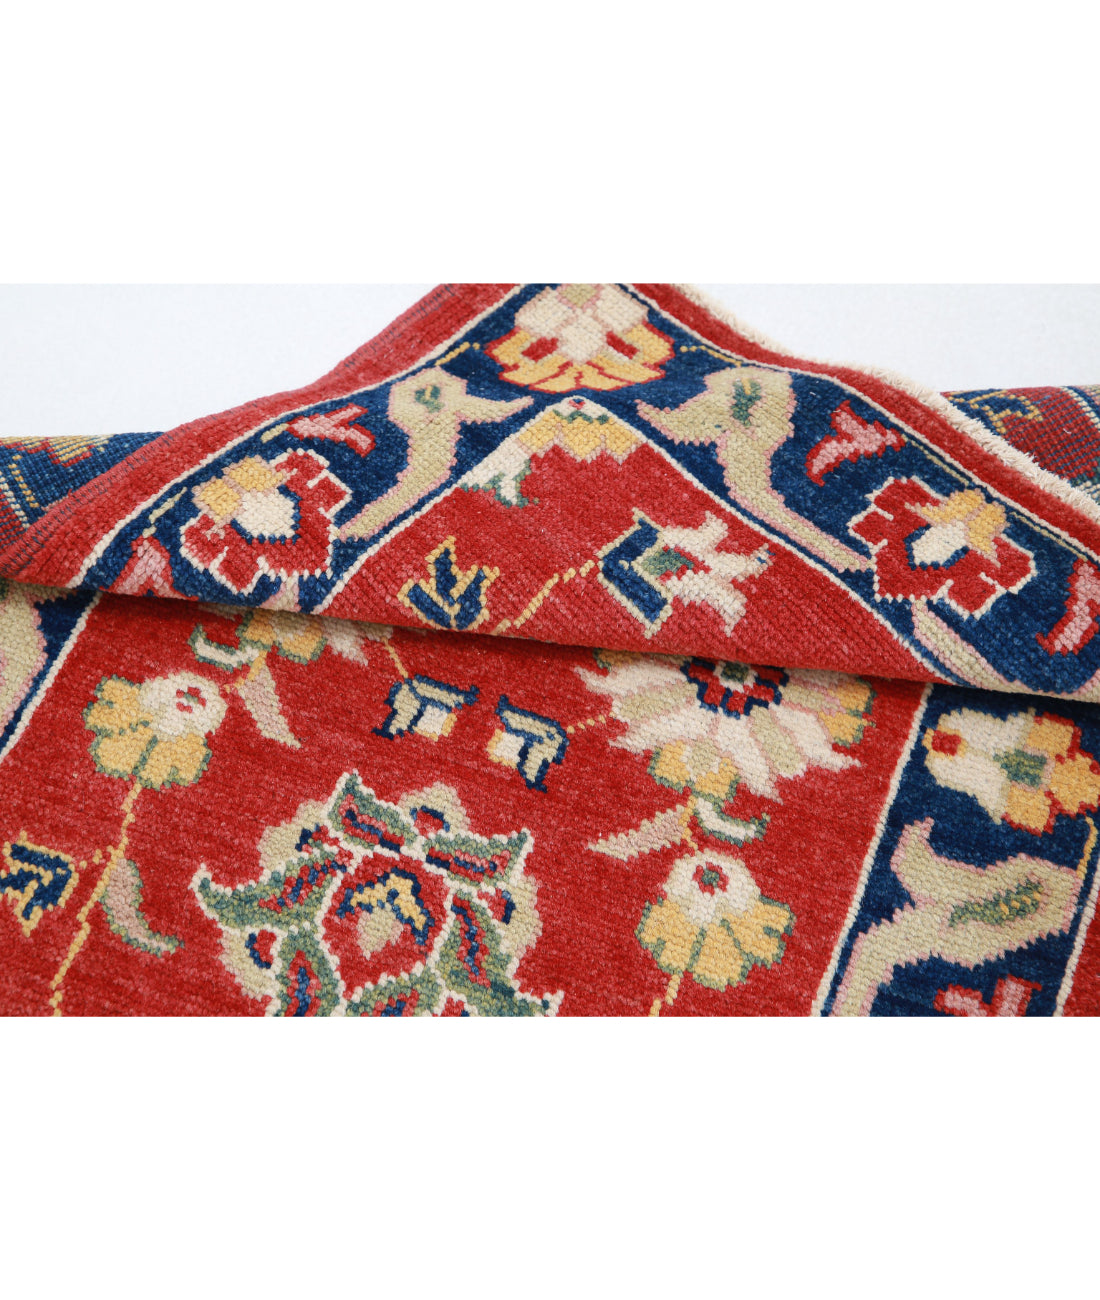 Ziegler 2'6'' X 3'7'' Hand-Knotted Wool Rug 2'6'' x 3'7'' (75 X 108) / Red / Blue